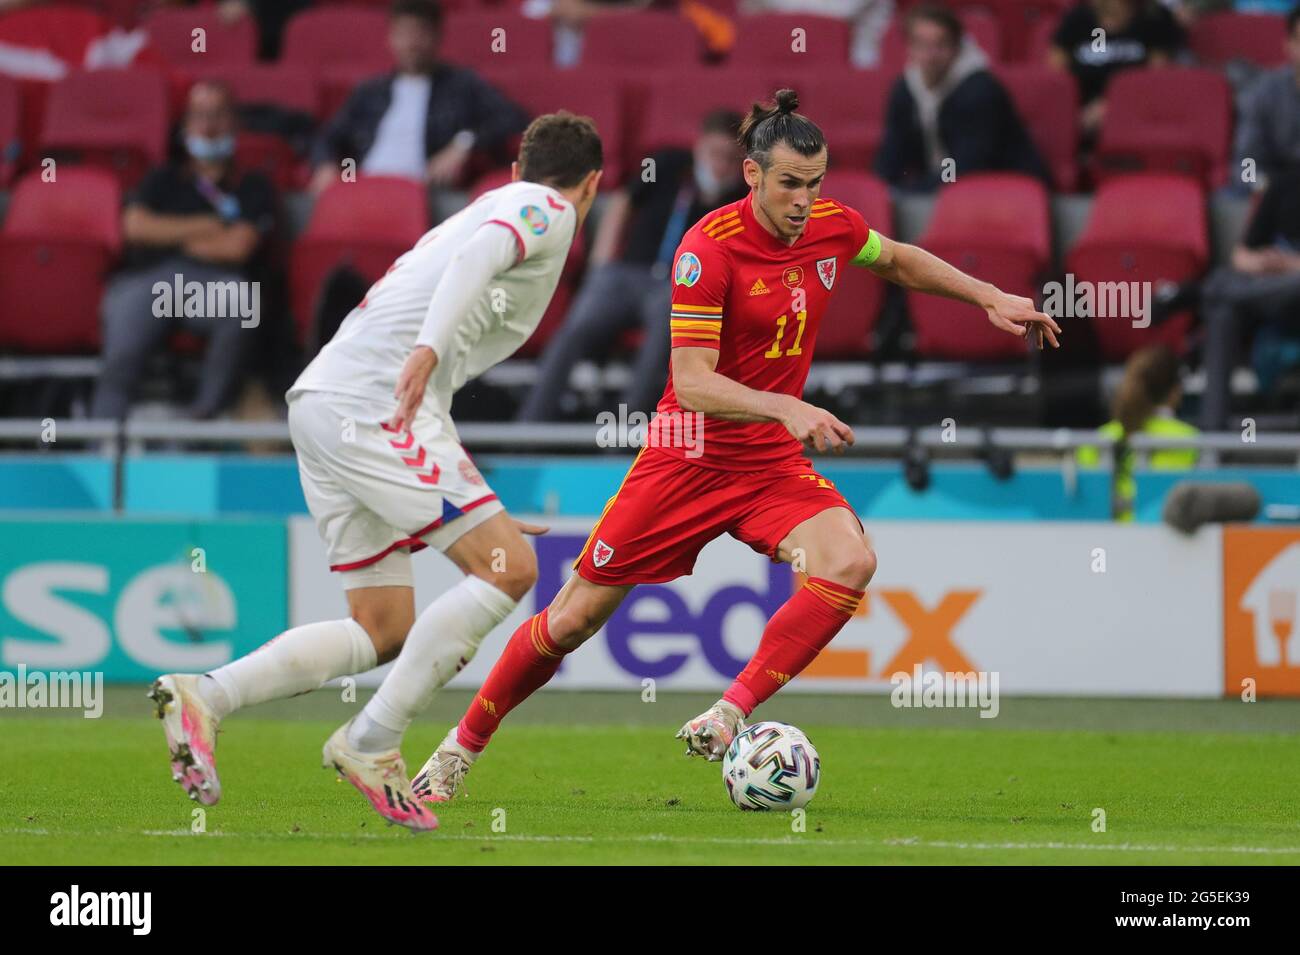 Amsterdam, Netherlands. 26th June, 2021. Gareth Bale (R) of Wales dribbles during the UEFA Euro 2020 Championship Round of 16 match between Wales and Denmark at Johan Cruijff ArenA in Amsterdam, the Netherlands, June 26, 2021. Credit: Zheng Huansong/Xinhua/Alamy Live News Stock Photo